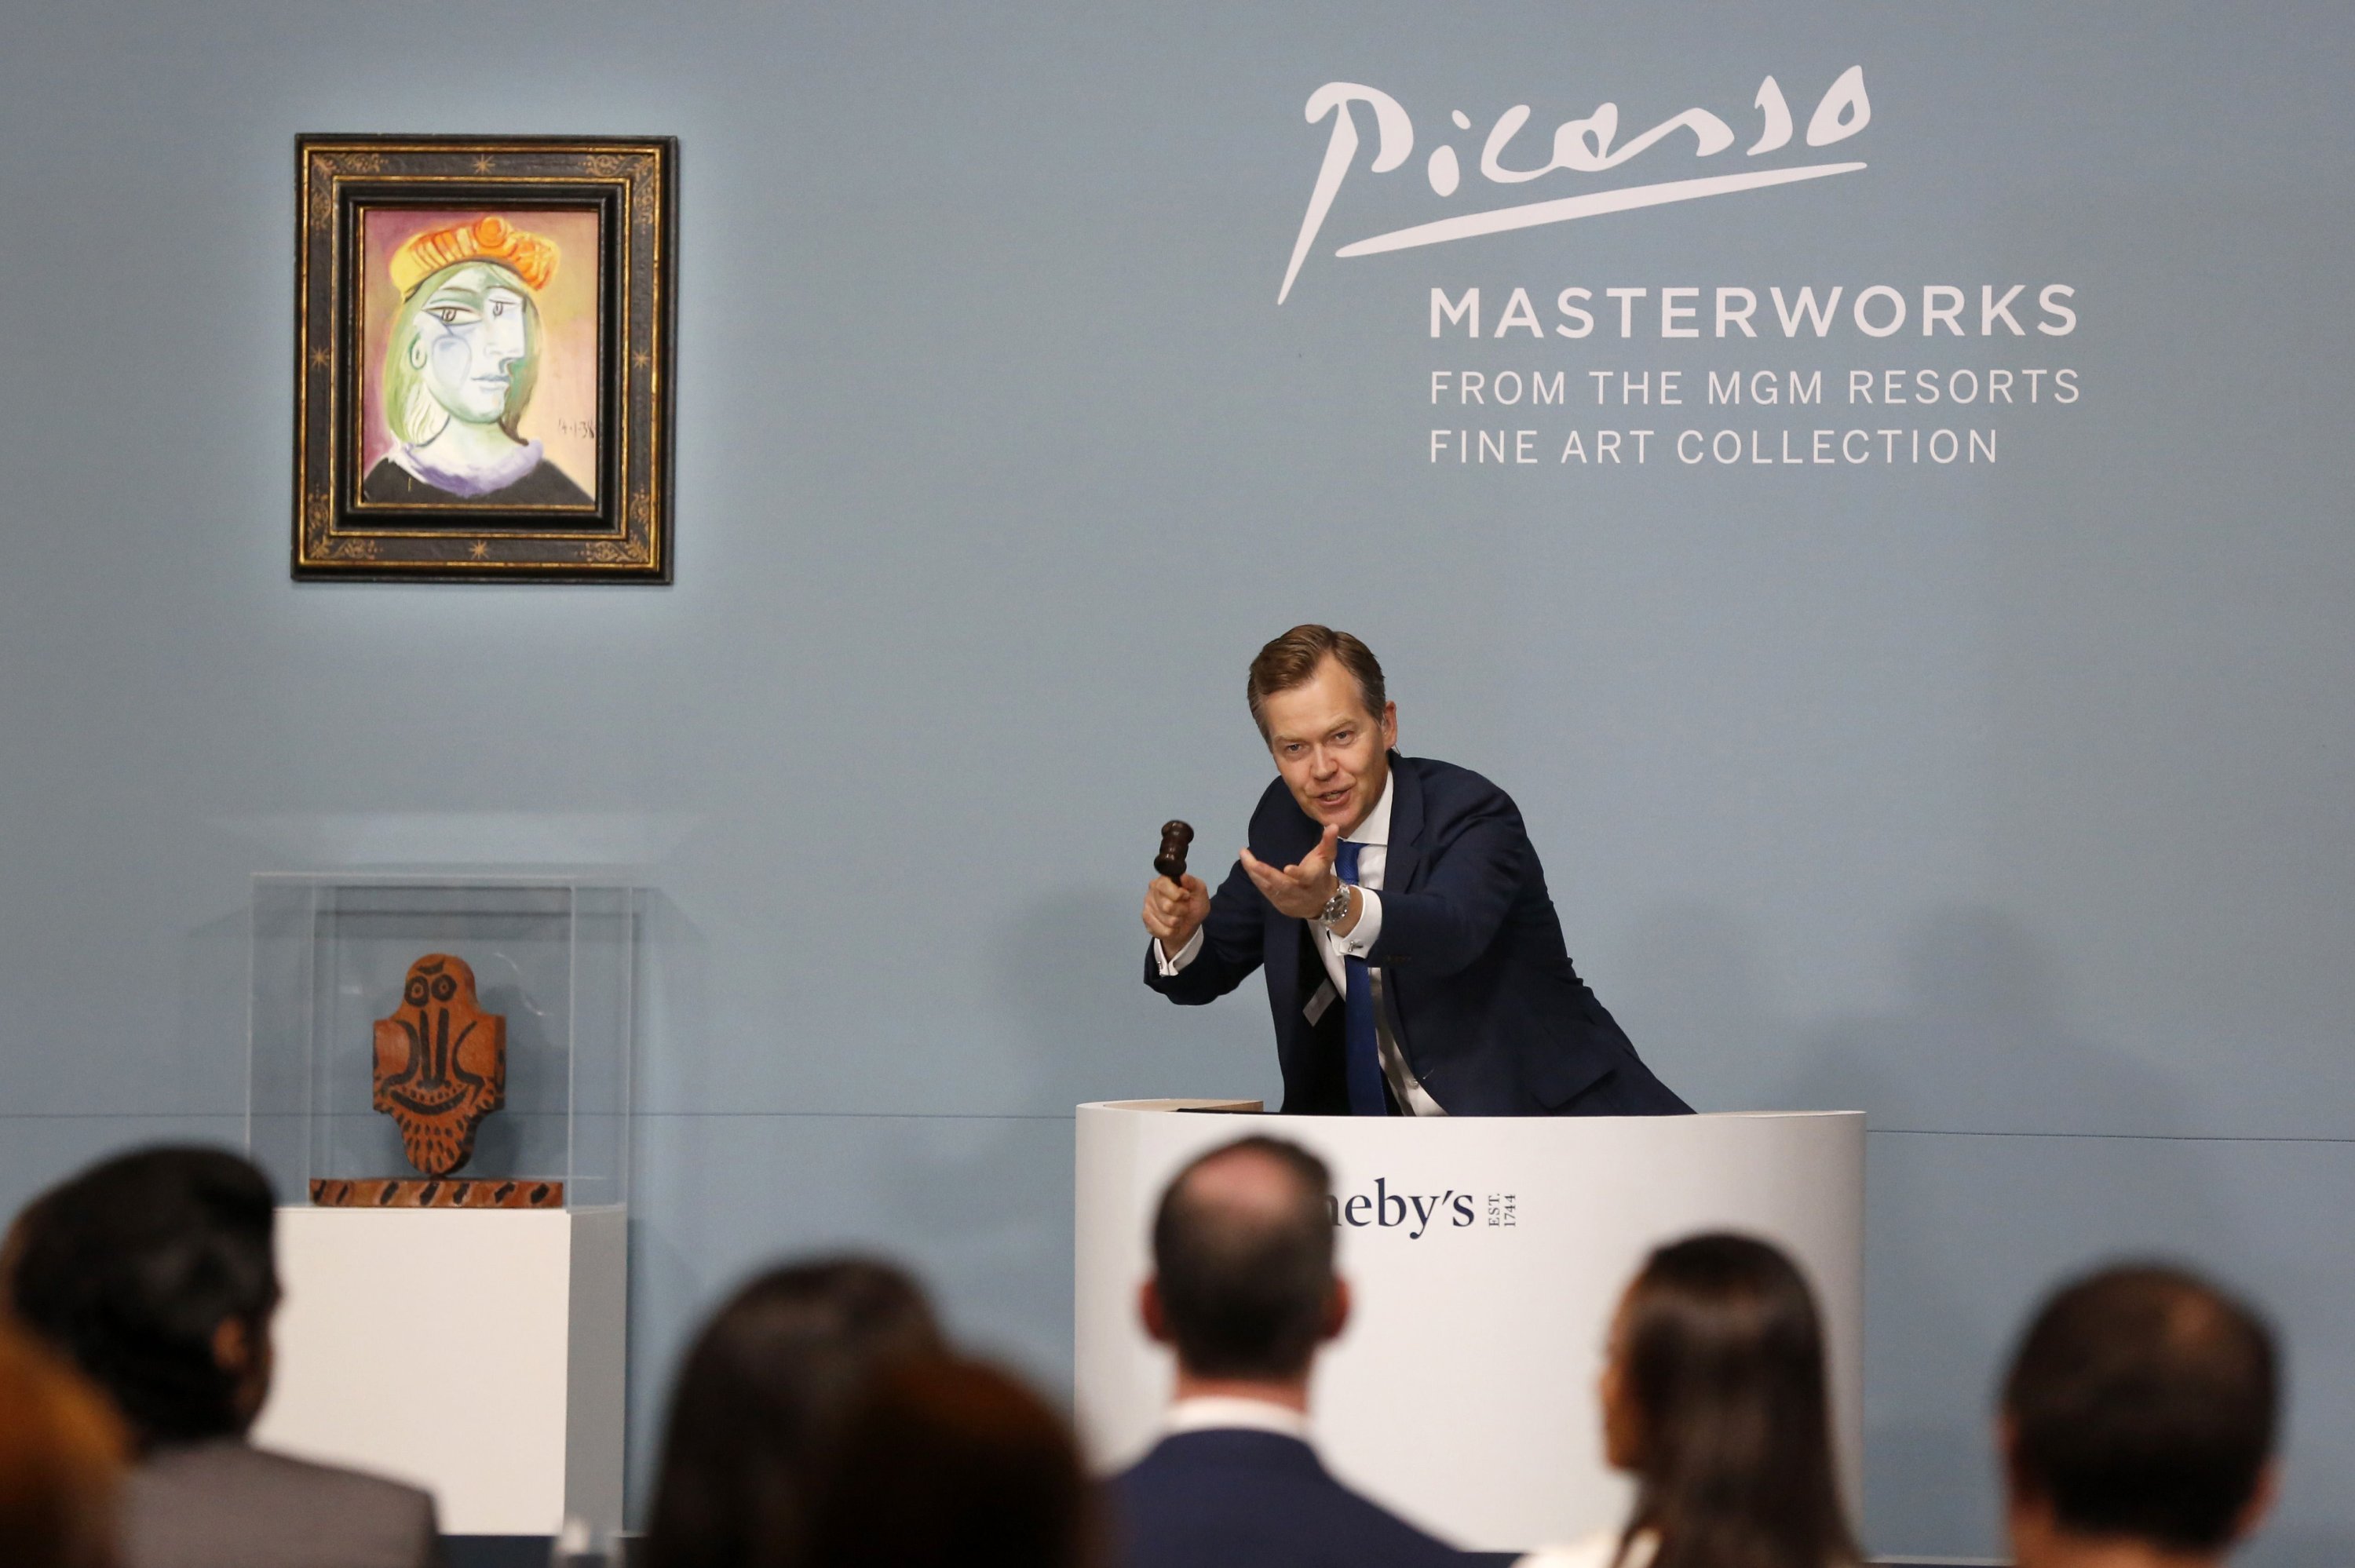 Sotheby's auctioneer Oliver Barker interacts with the audience during the Sotheby's 'Picasso: Masterworks From The MGM Resorts Fine Art Collection' auction at the Bellagio hotel and casino, in Las Vegas, U.S., Oct. 23, 2021. (AFP Photo)